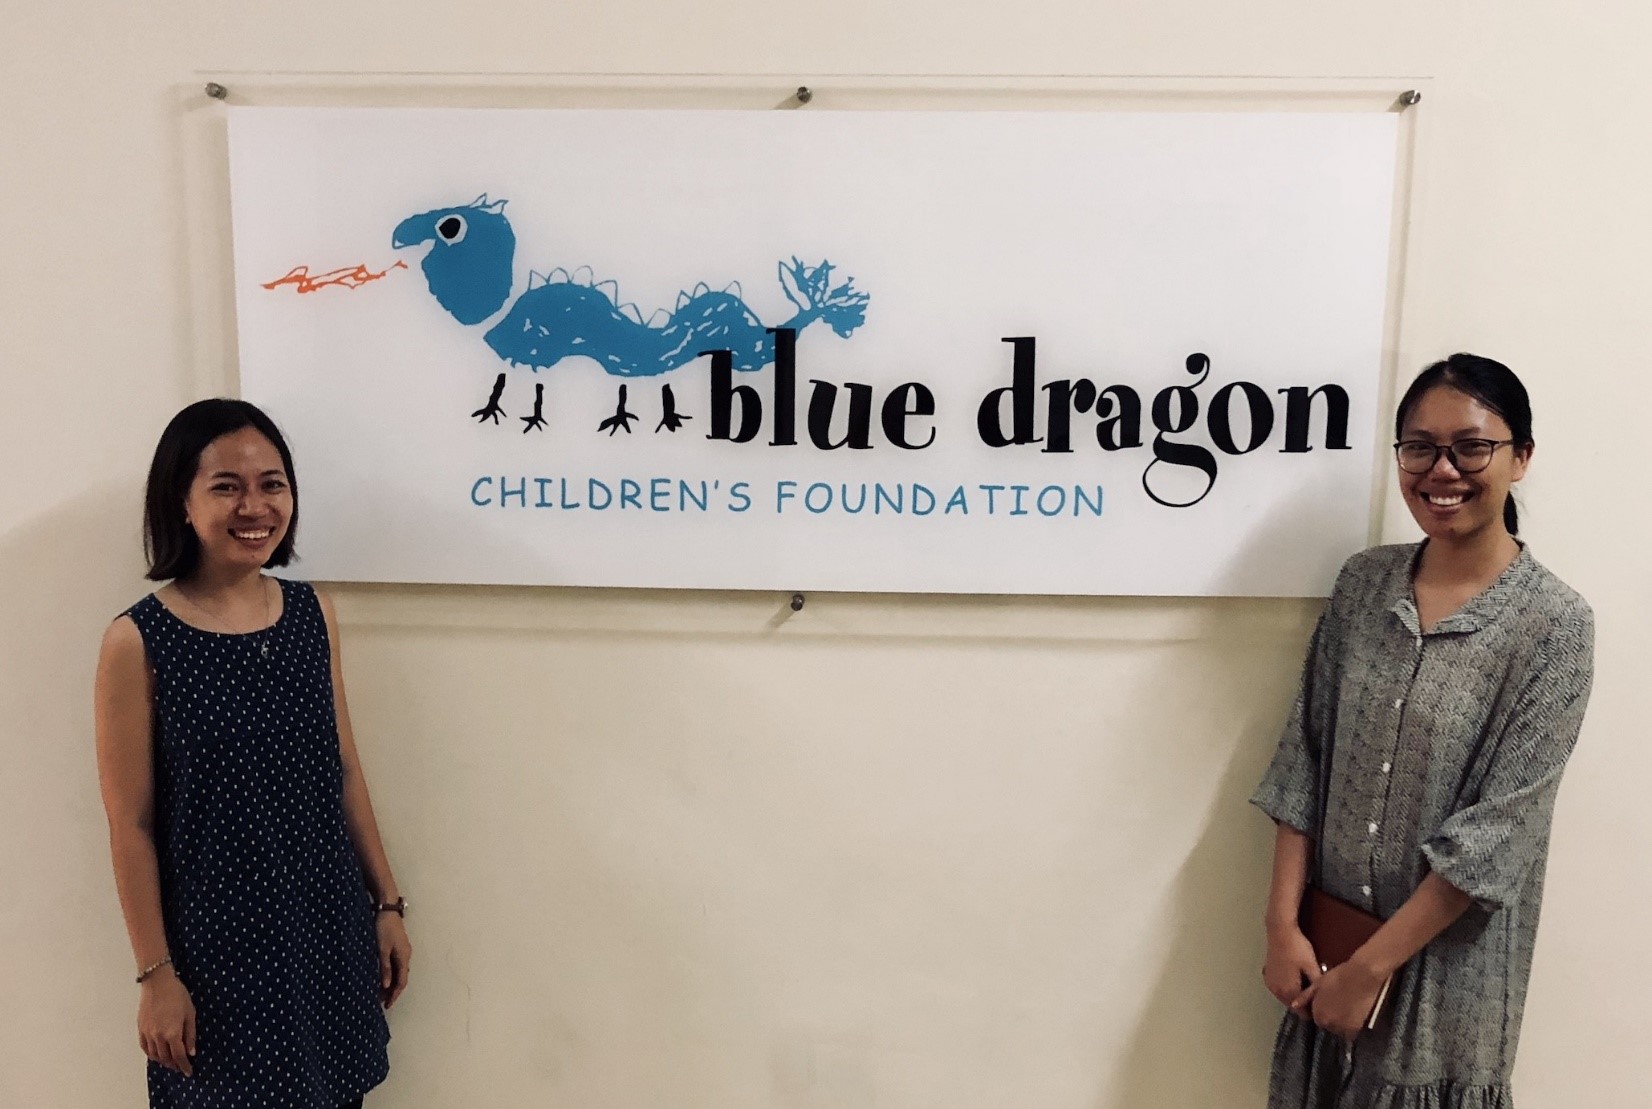 Communications and Fundraising Intern at Blue Dragon Children's Foundation